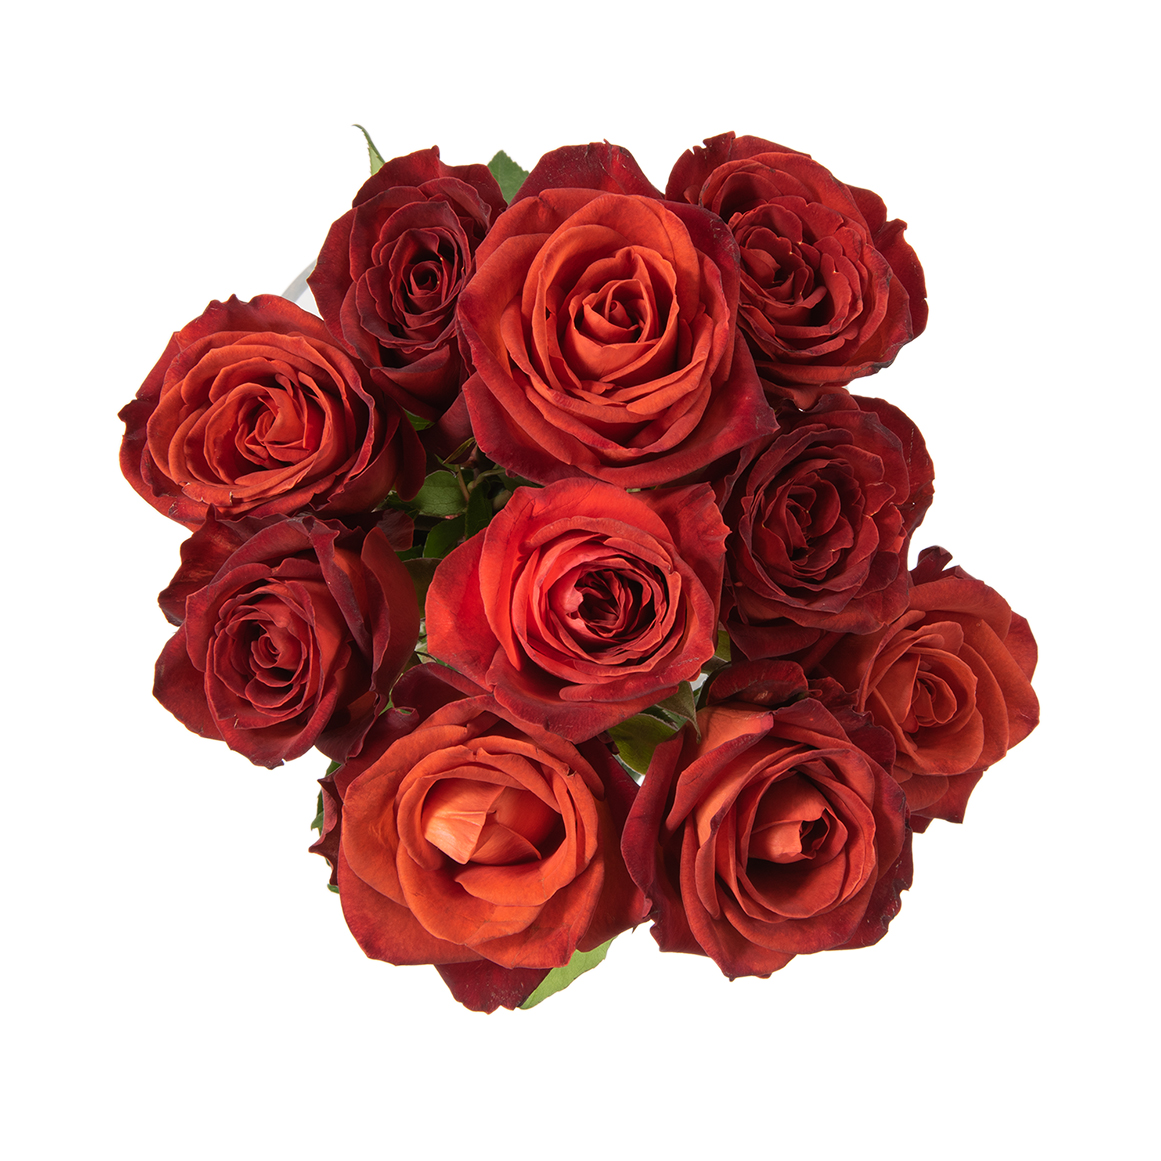 Café Del Mar Speciality Roses 10 Stems | Woolworths.co.za